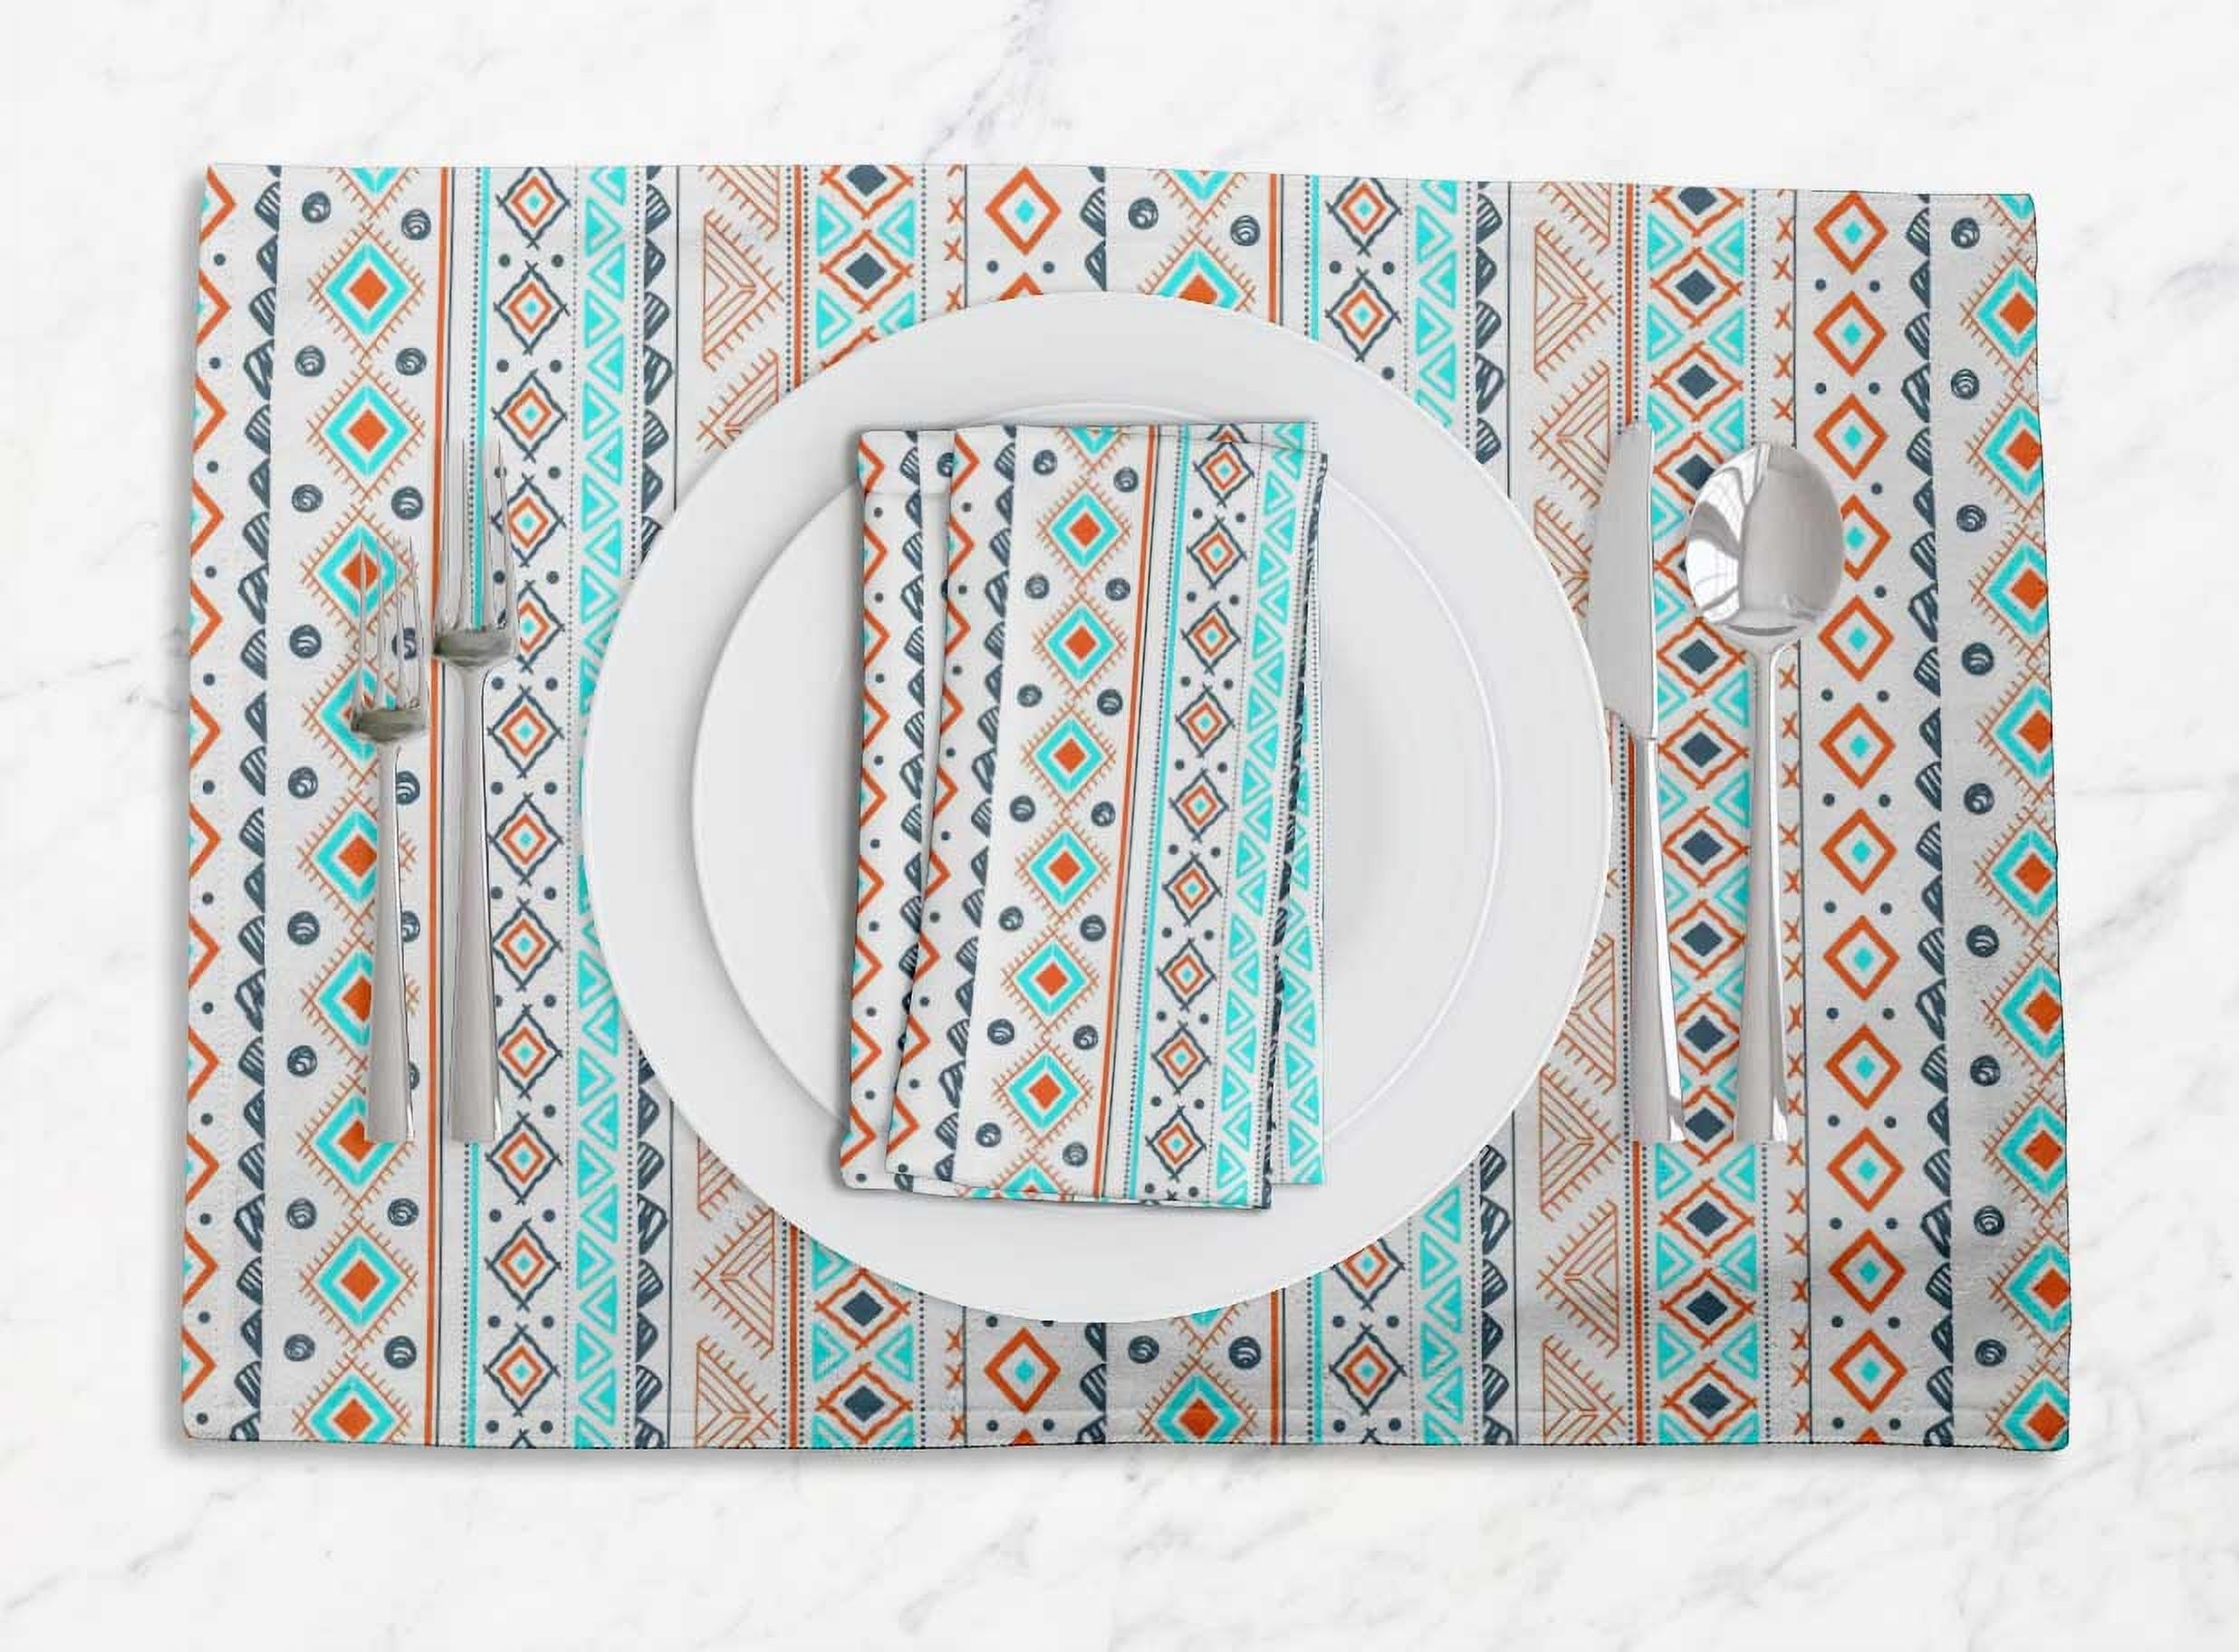 S4Sassy Geometric Printed Reversible Fabric Placemats Table Dining Mats-GMD-35A 